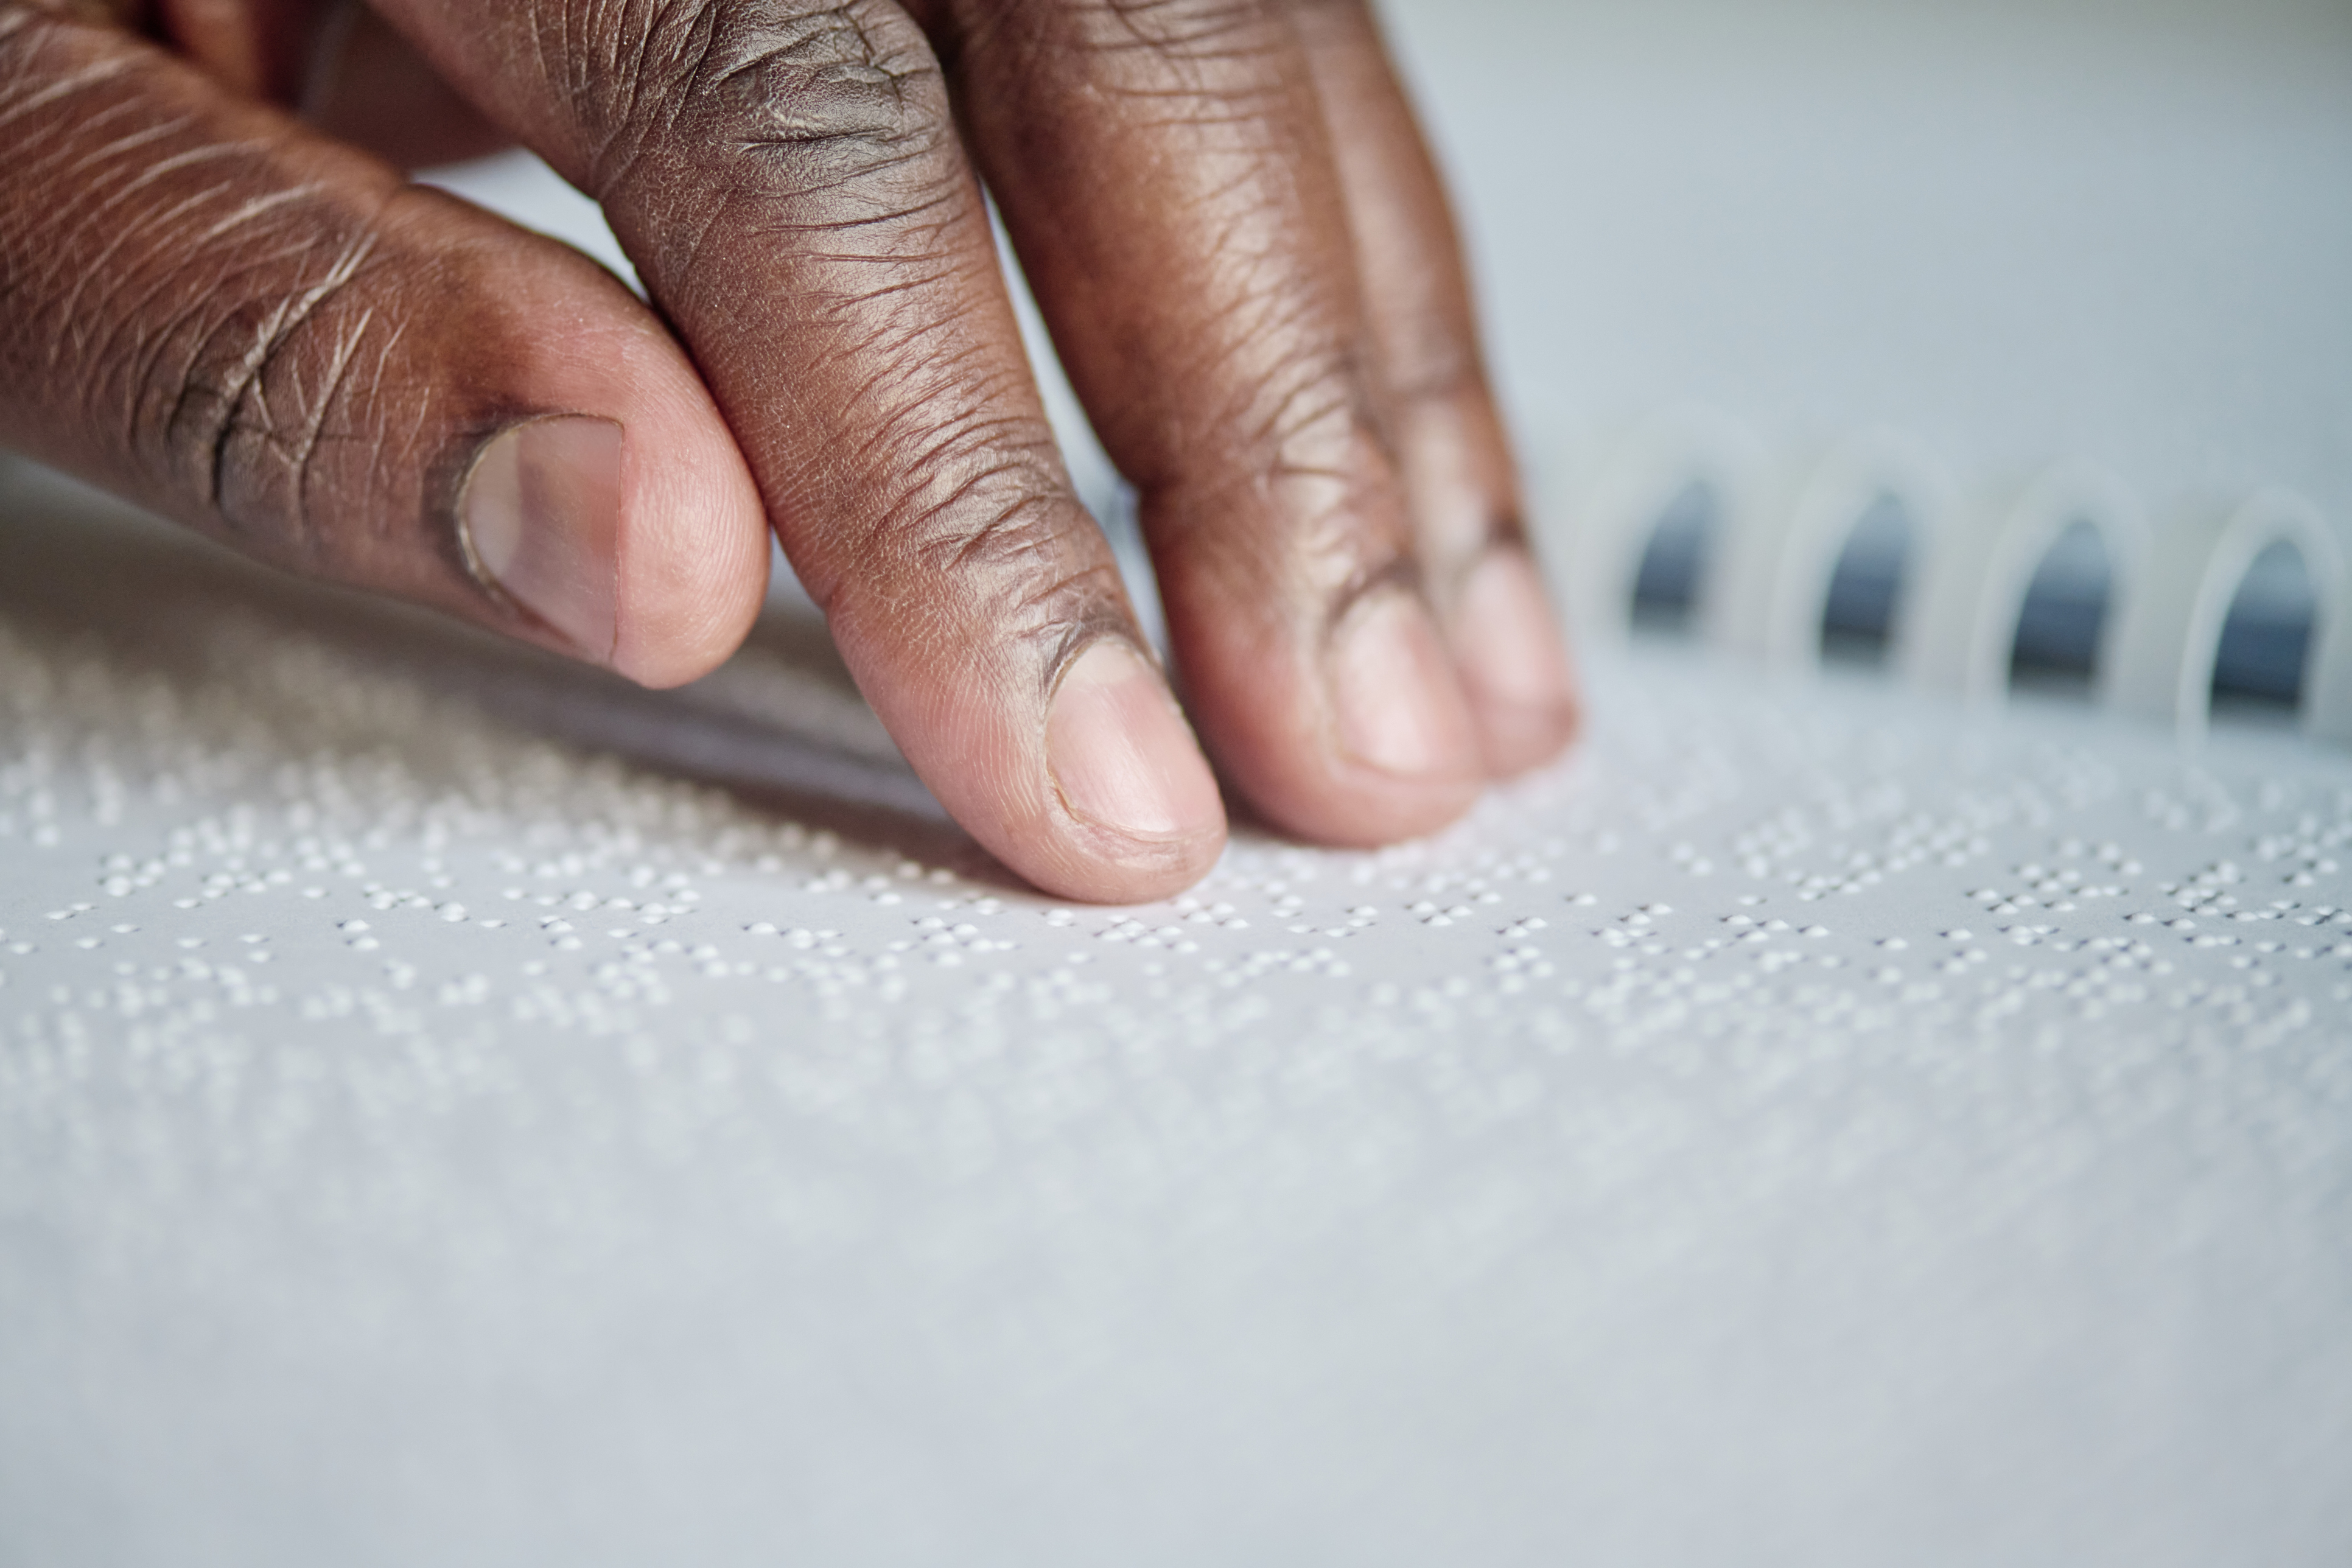 A Black man uses his fingers to read braille